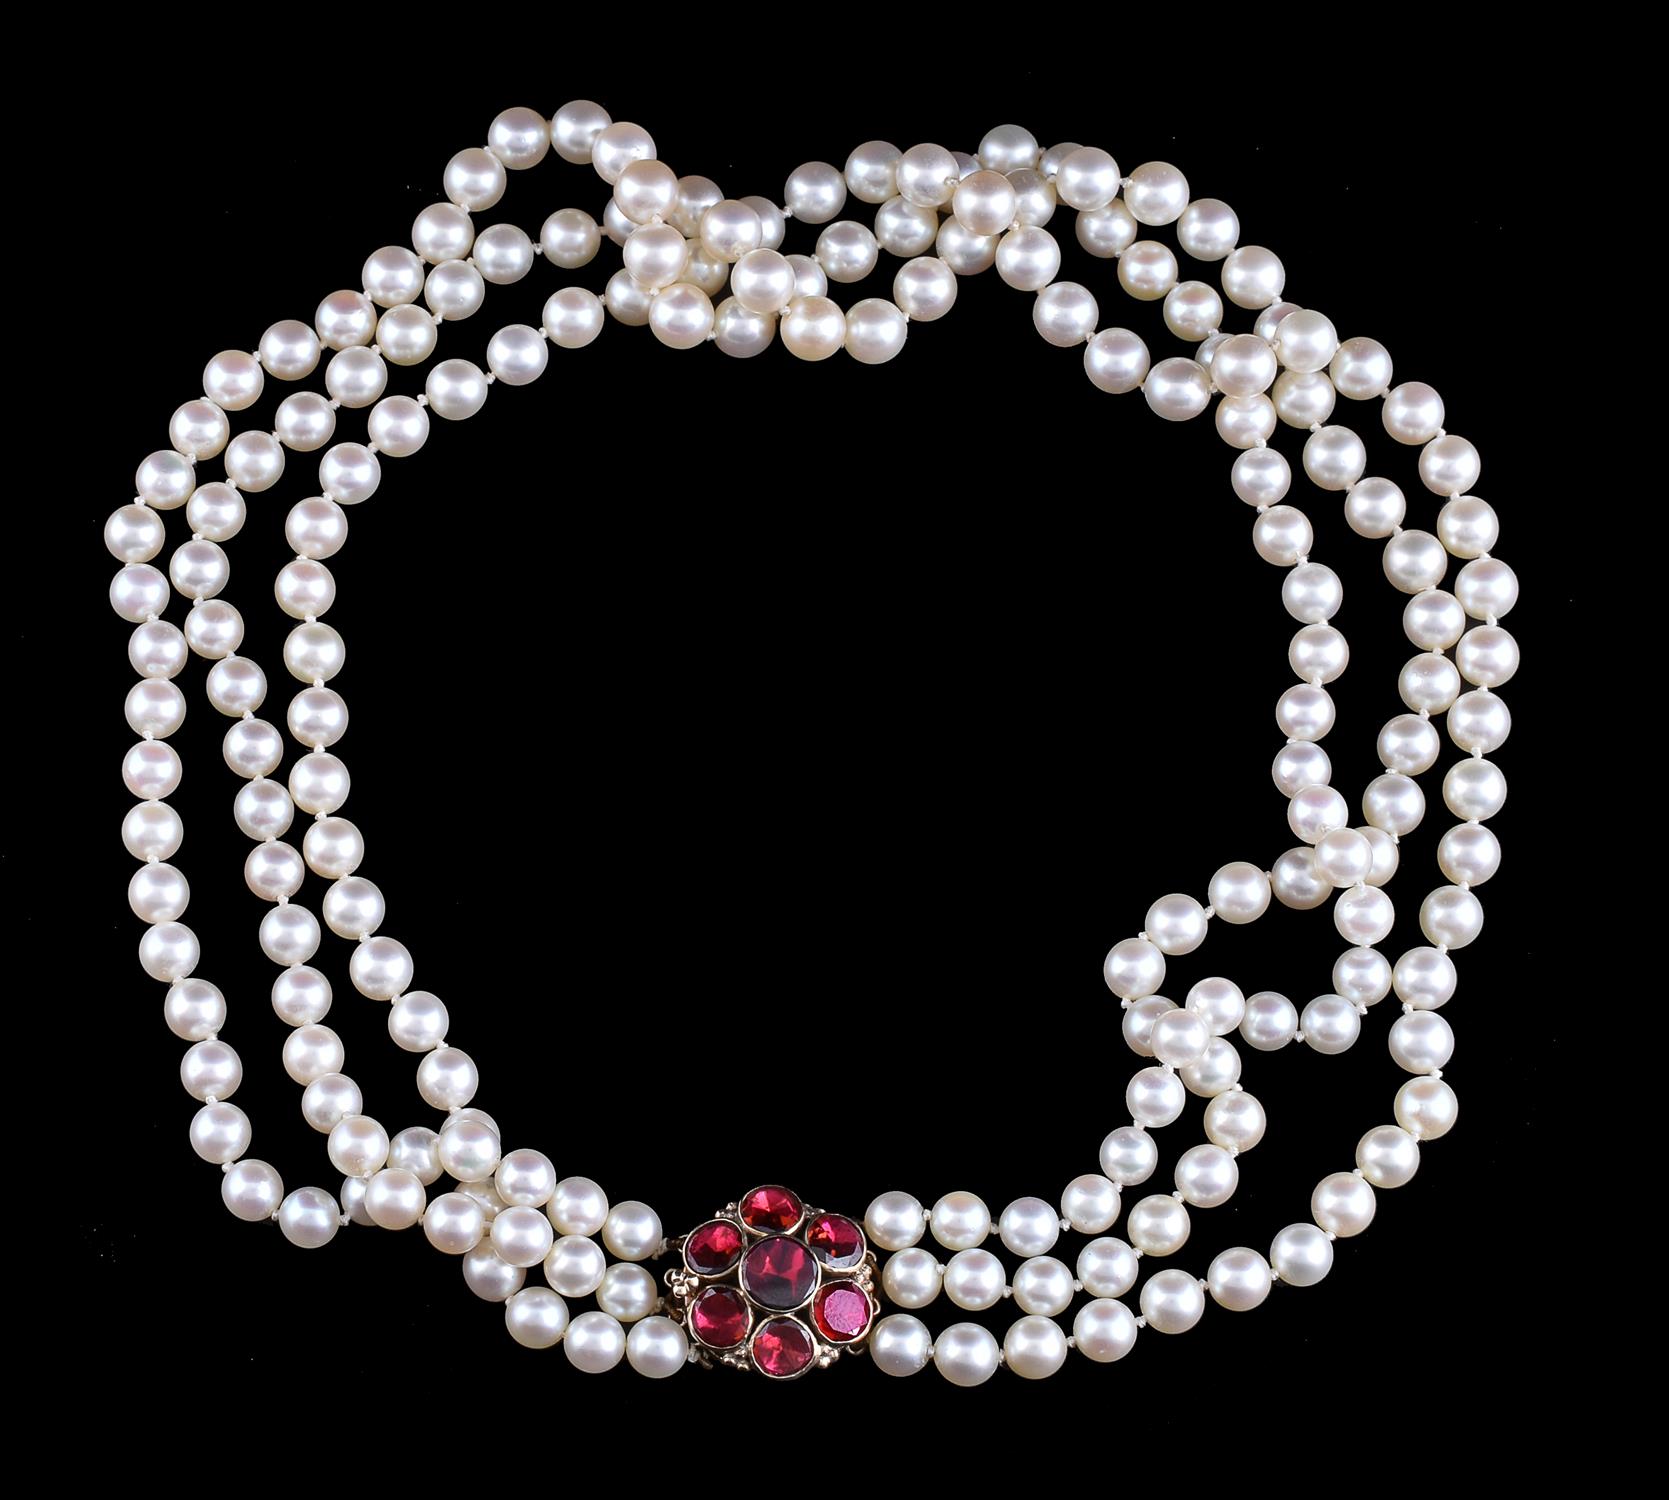 A three row cultured pearl and garnet necklace